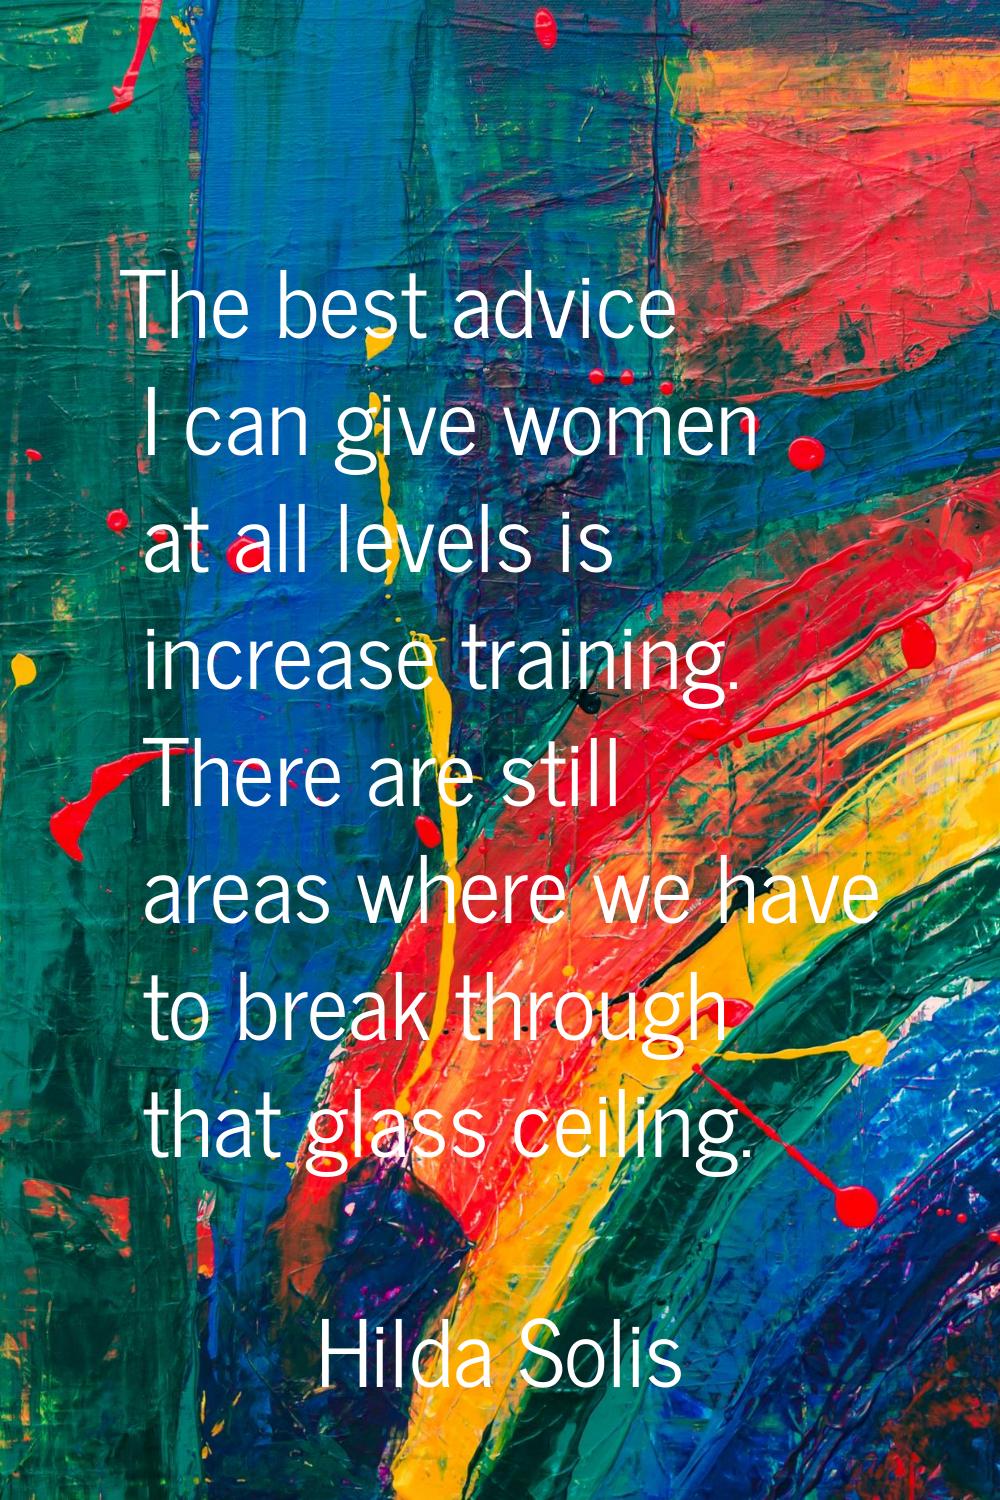 The best advice I can give women at all levels is increase training. There are still areas where we